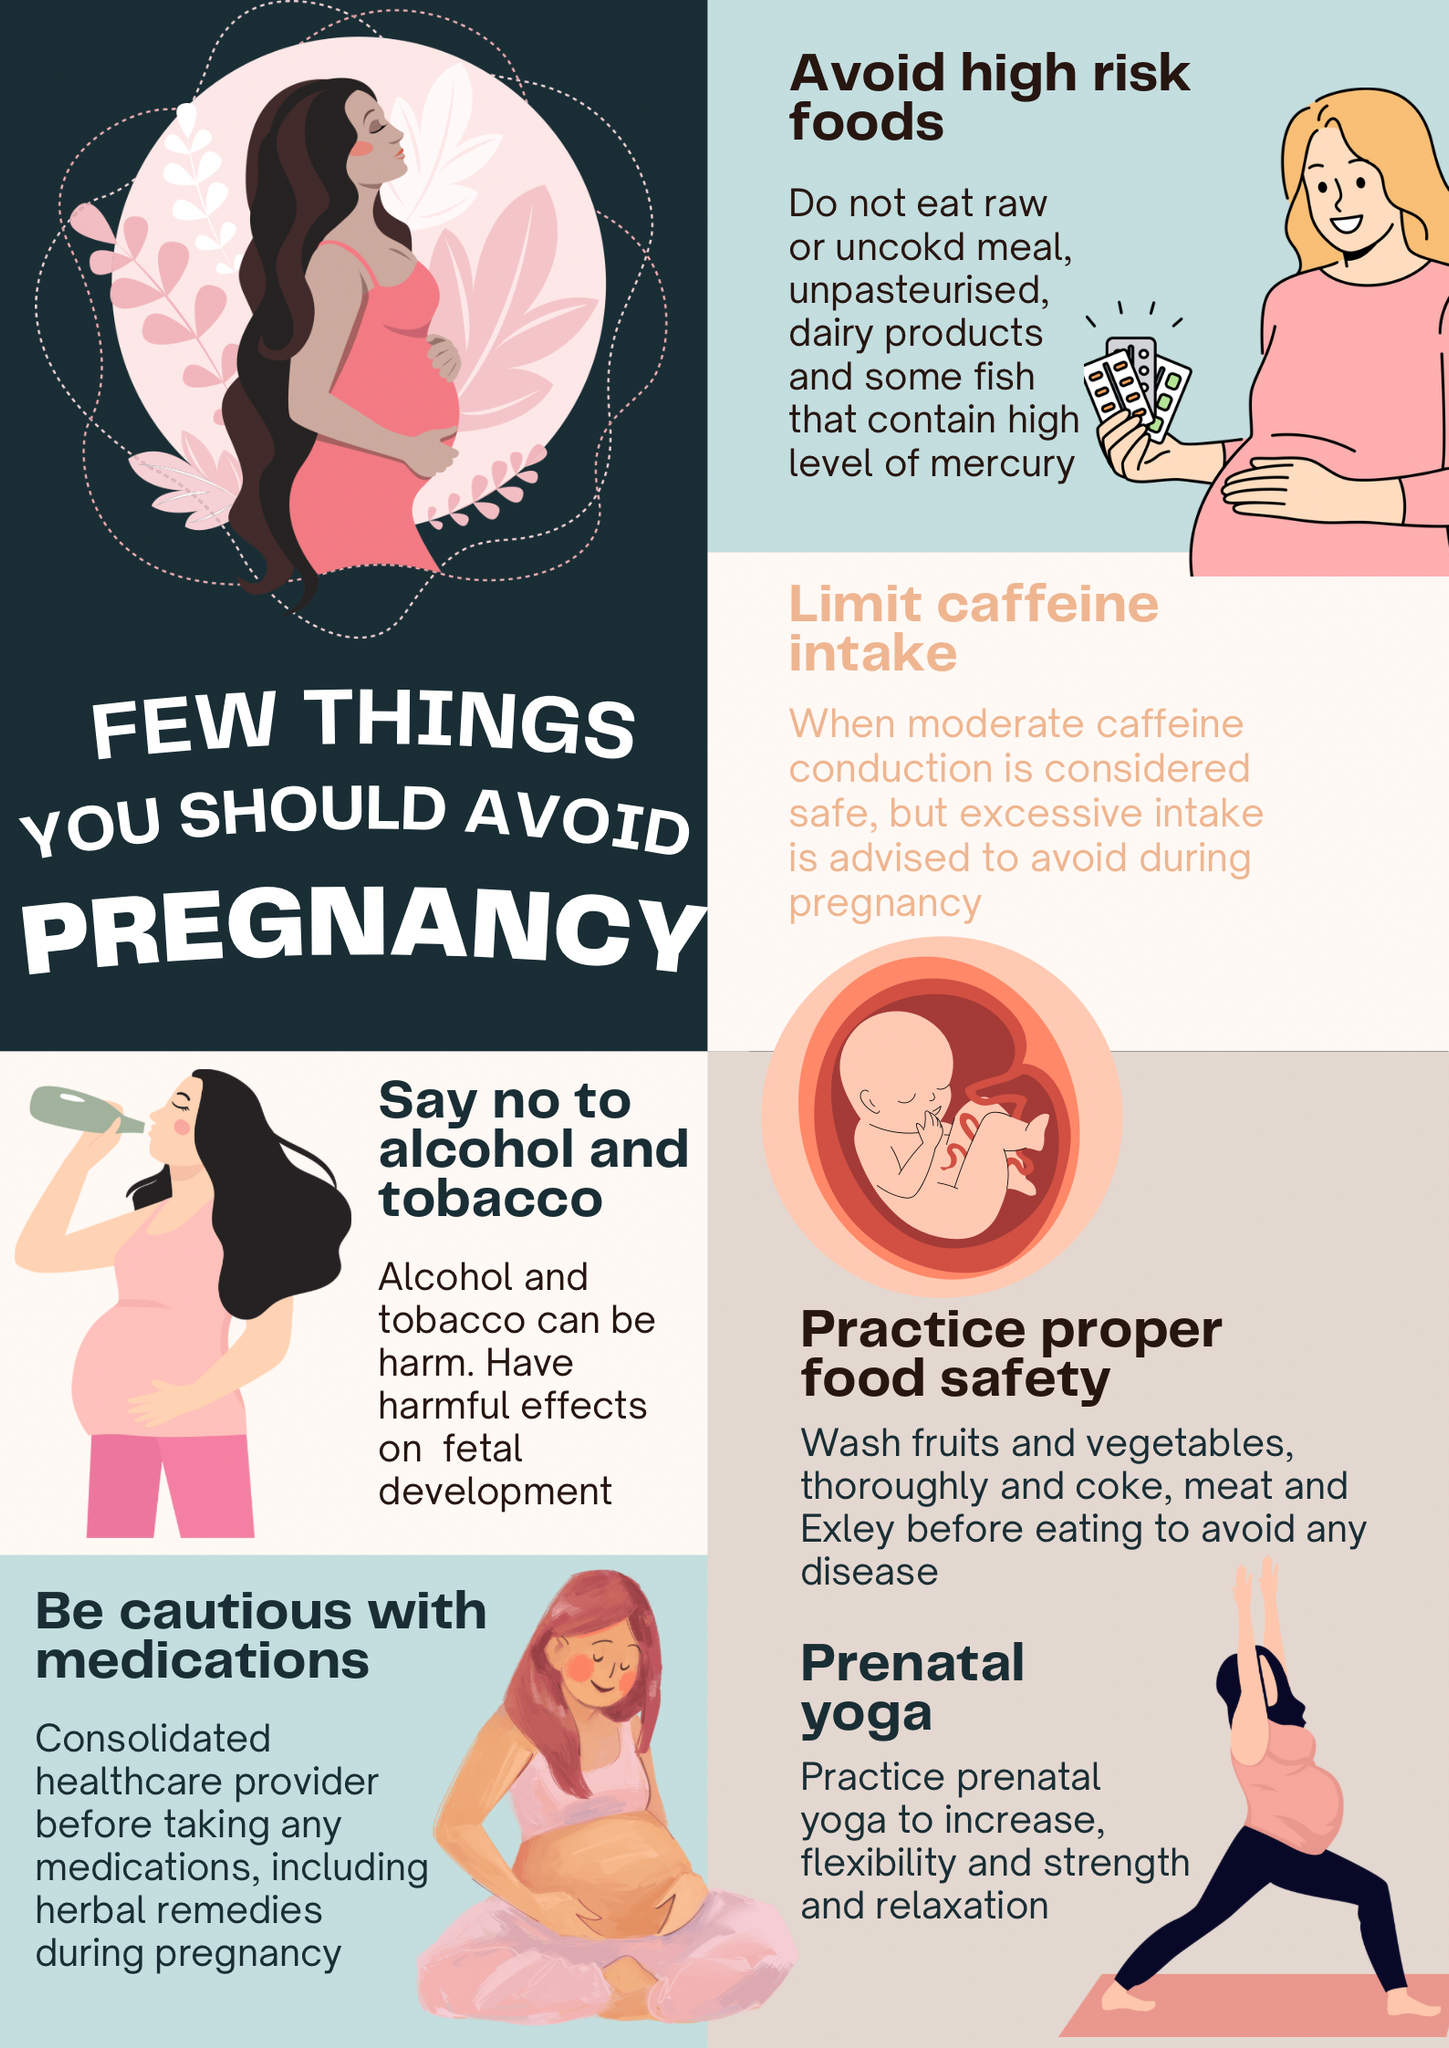 Things to avoid during pregnancy like caffeine, tobacco.